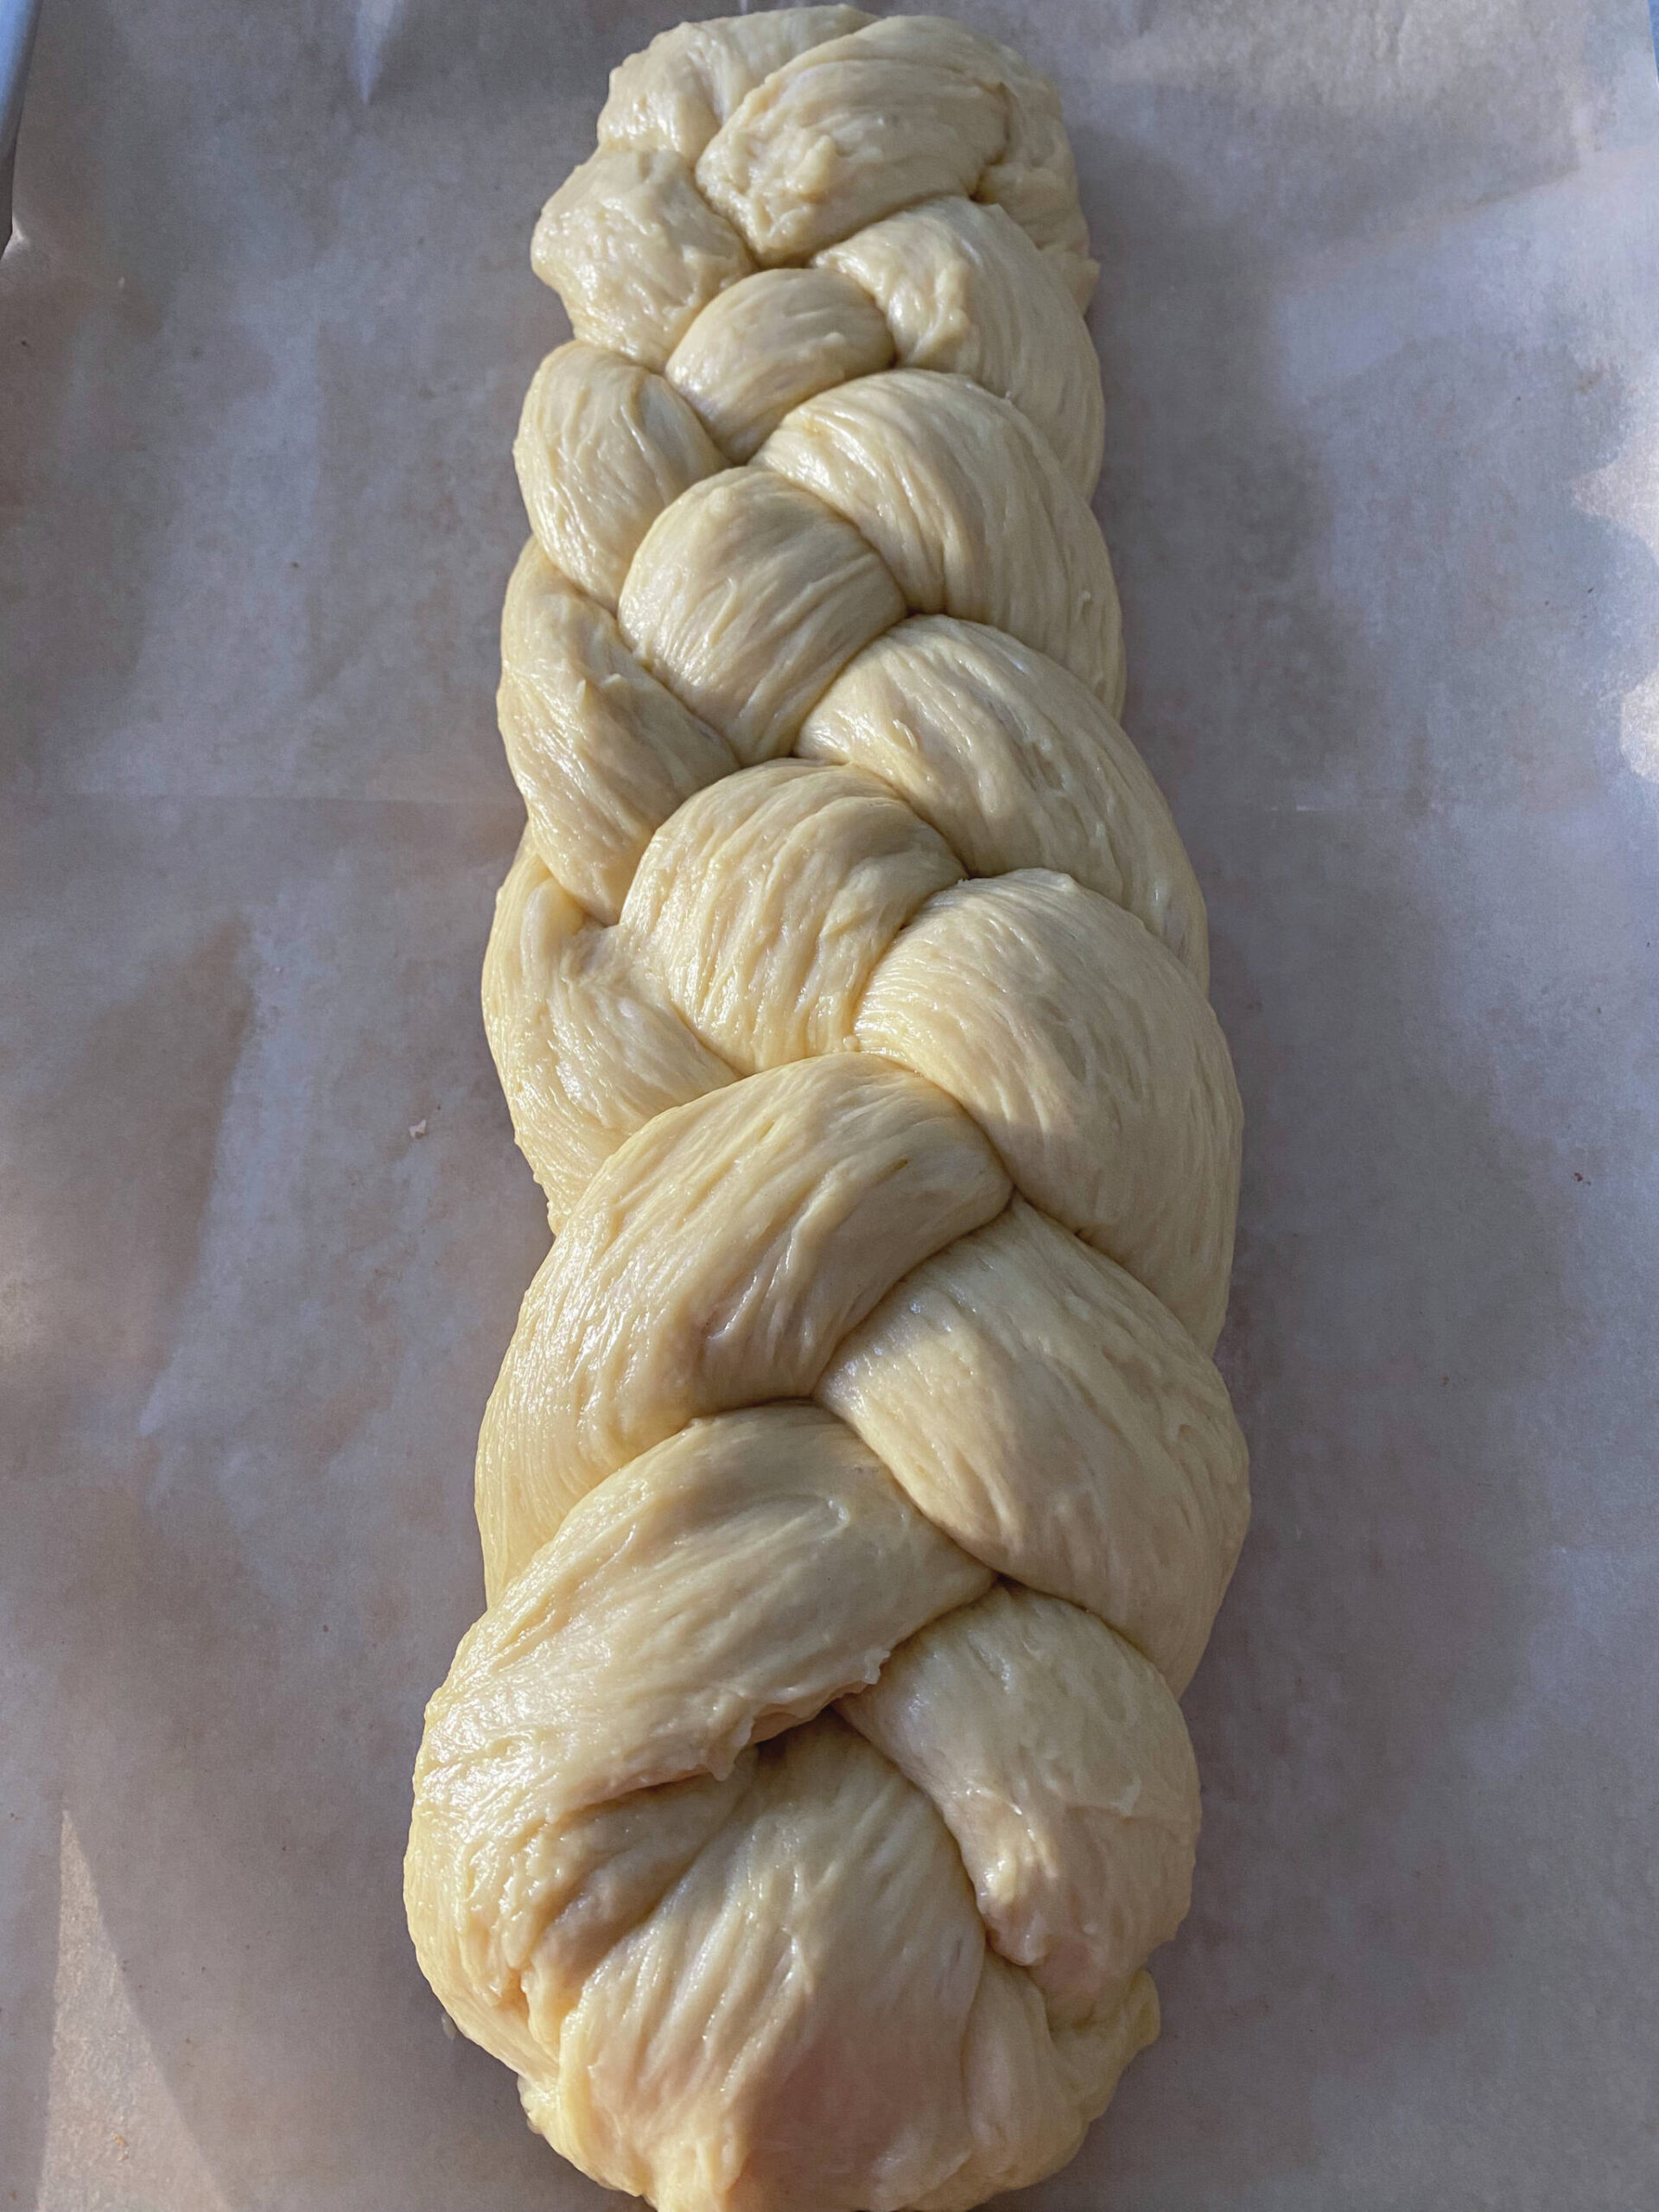 This decadent brioche dough is made rich with eggs and warmed milk. (Photo by Tressa Dale/Peninsula Clarion)